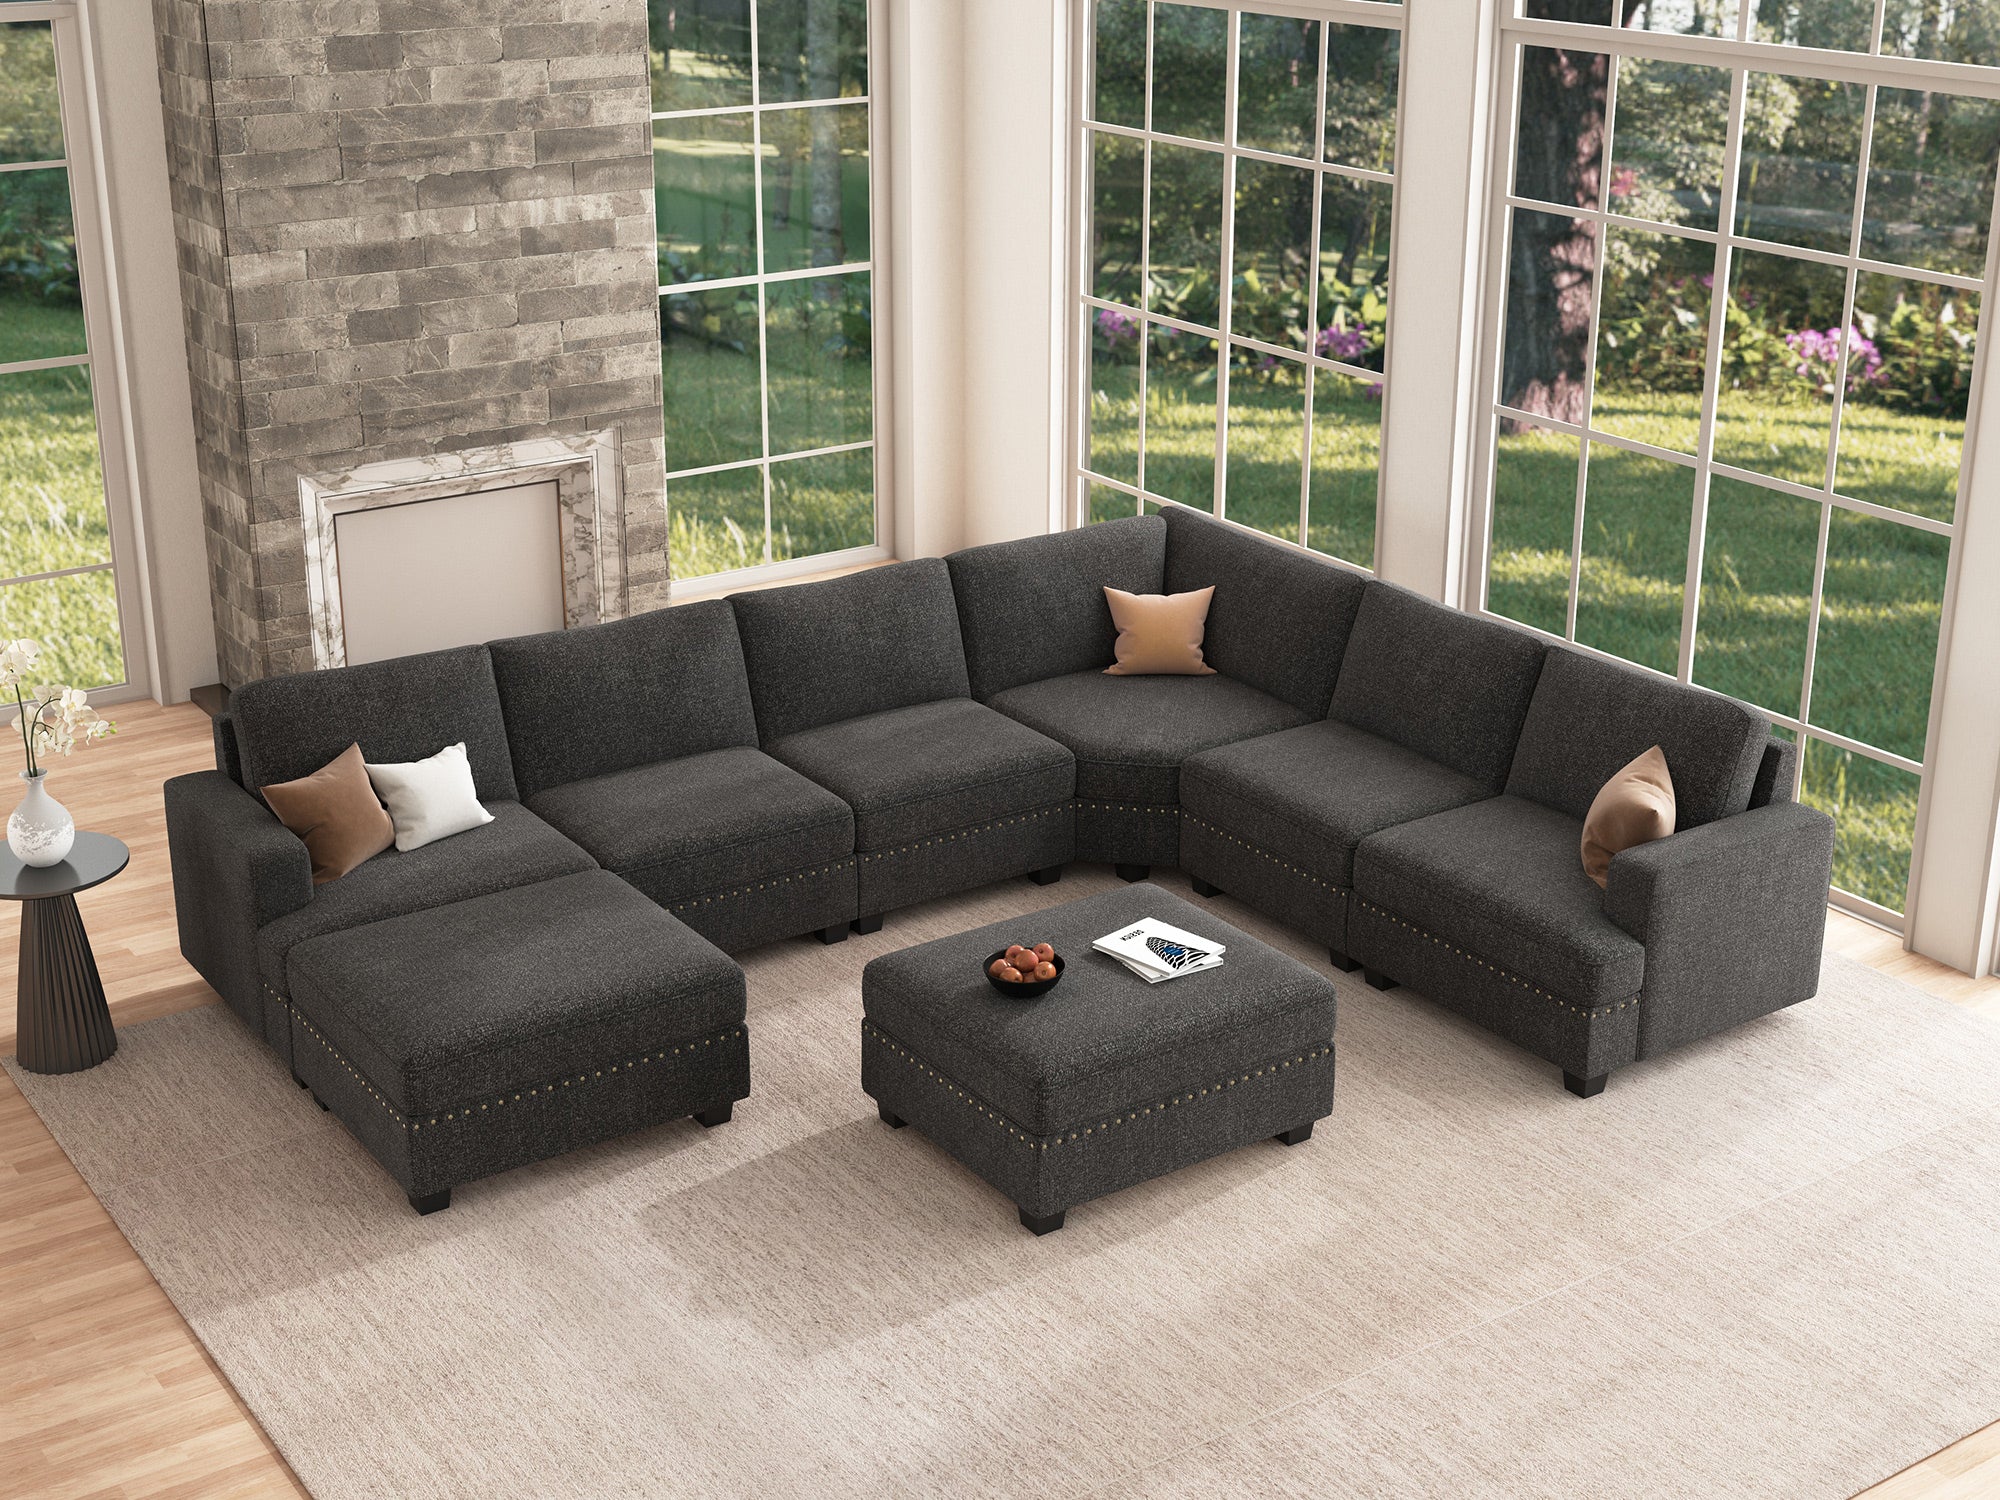 HONBAY 6-Seat Corner Modular Sofa Oversized Sectional Sofa Couch with Two Storage Reversible Ottoman #Color_Dark Grey